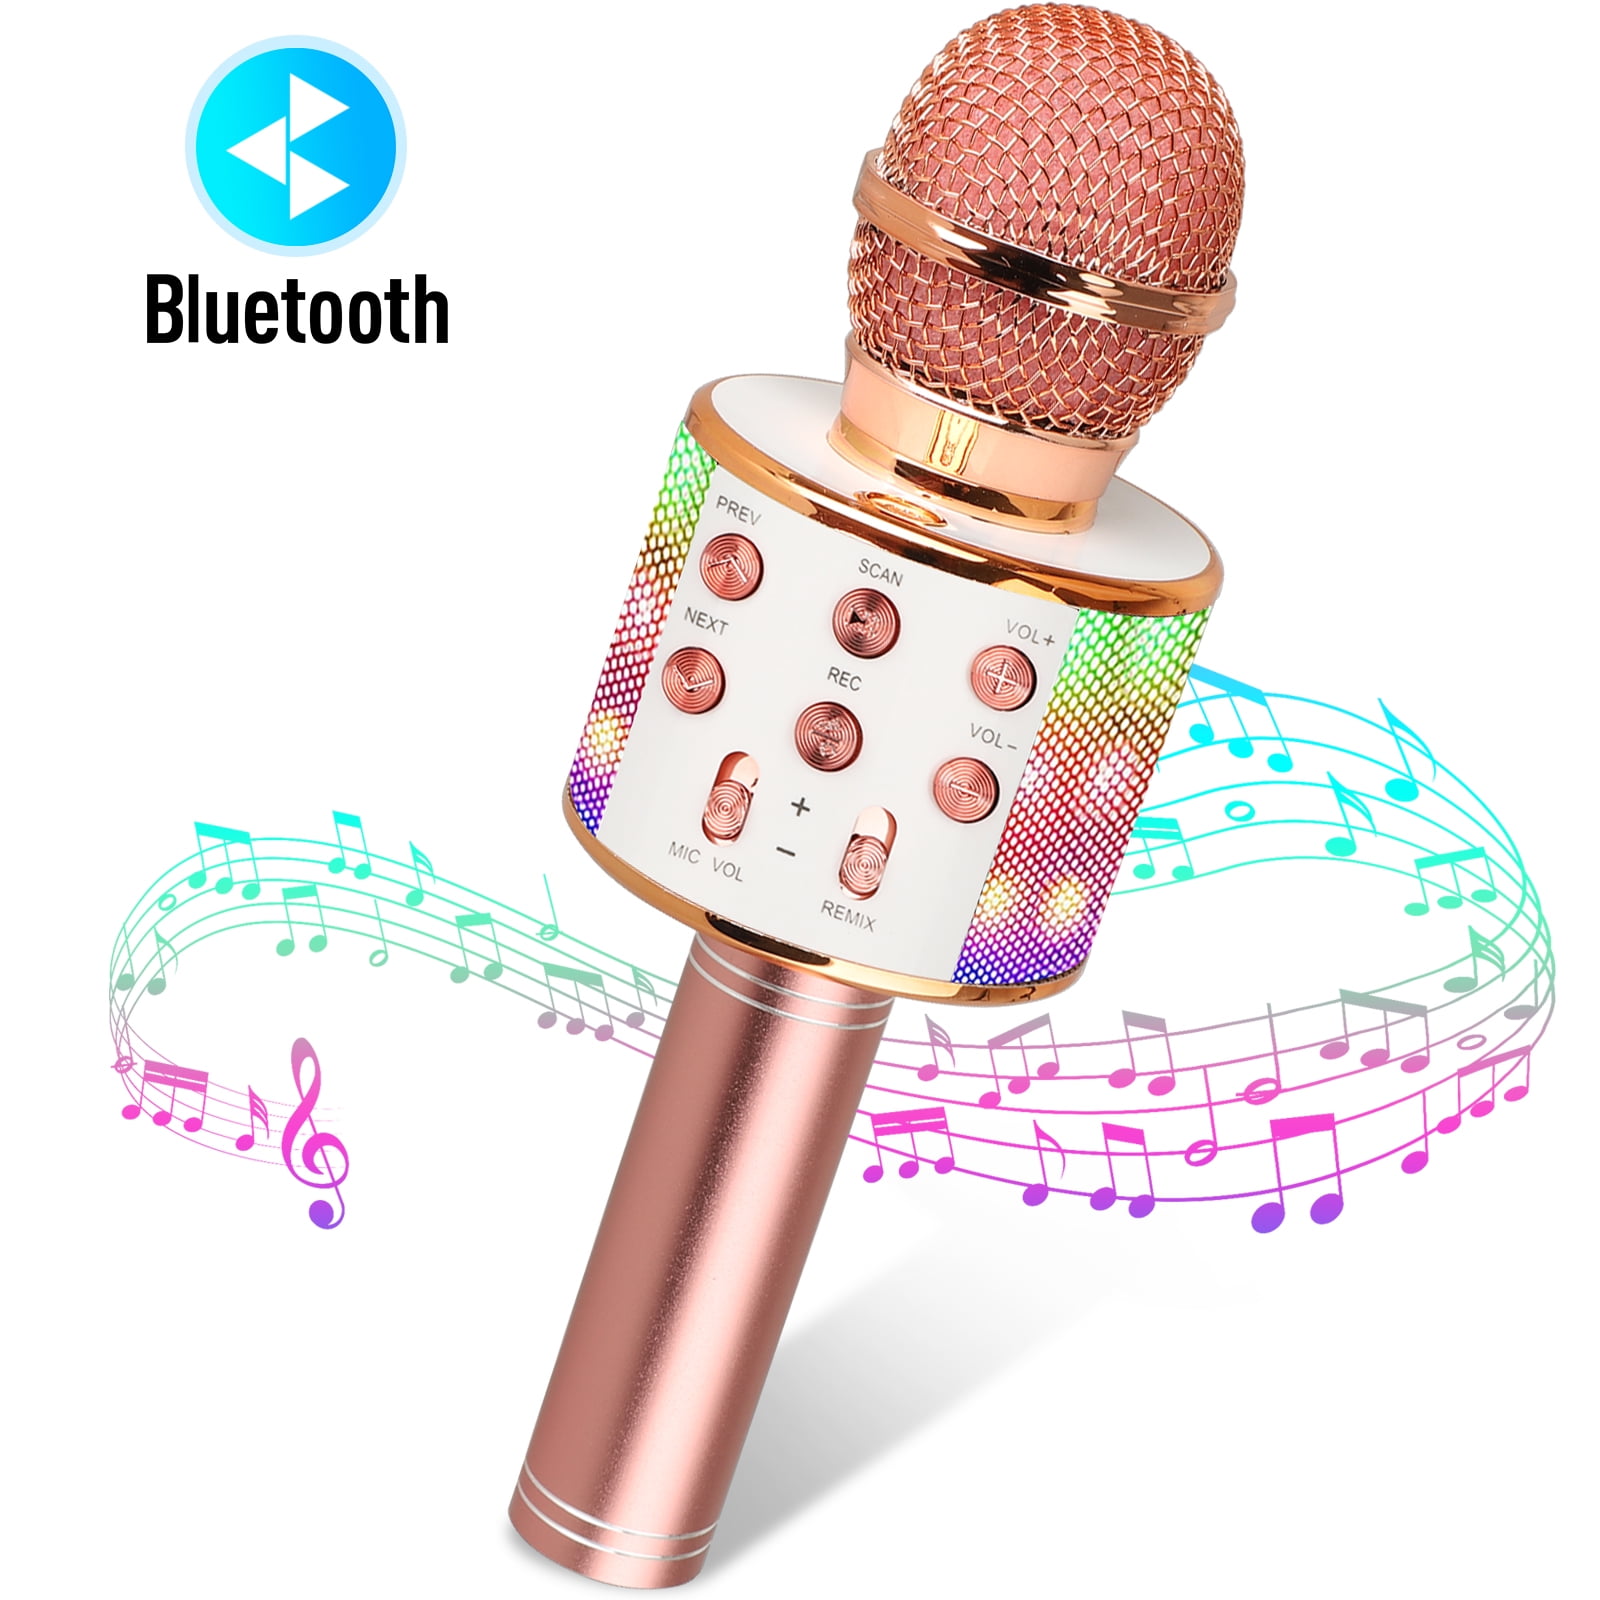 EEEkit Wireless Bluetooth Portable Karaoke Microphone, Handheld Speaker Machine for Home Birthday Party, Gifts Toys Kids, Girls, Boys and Adults